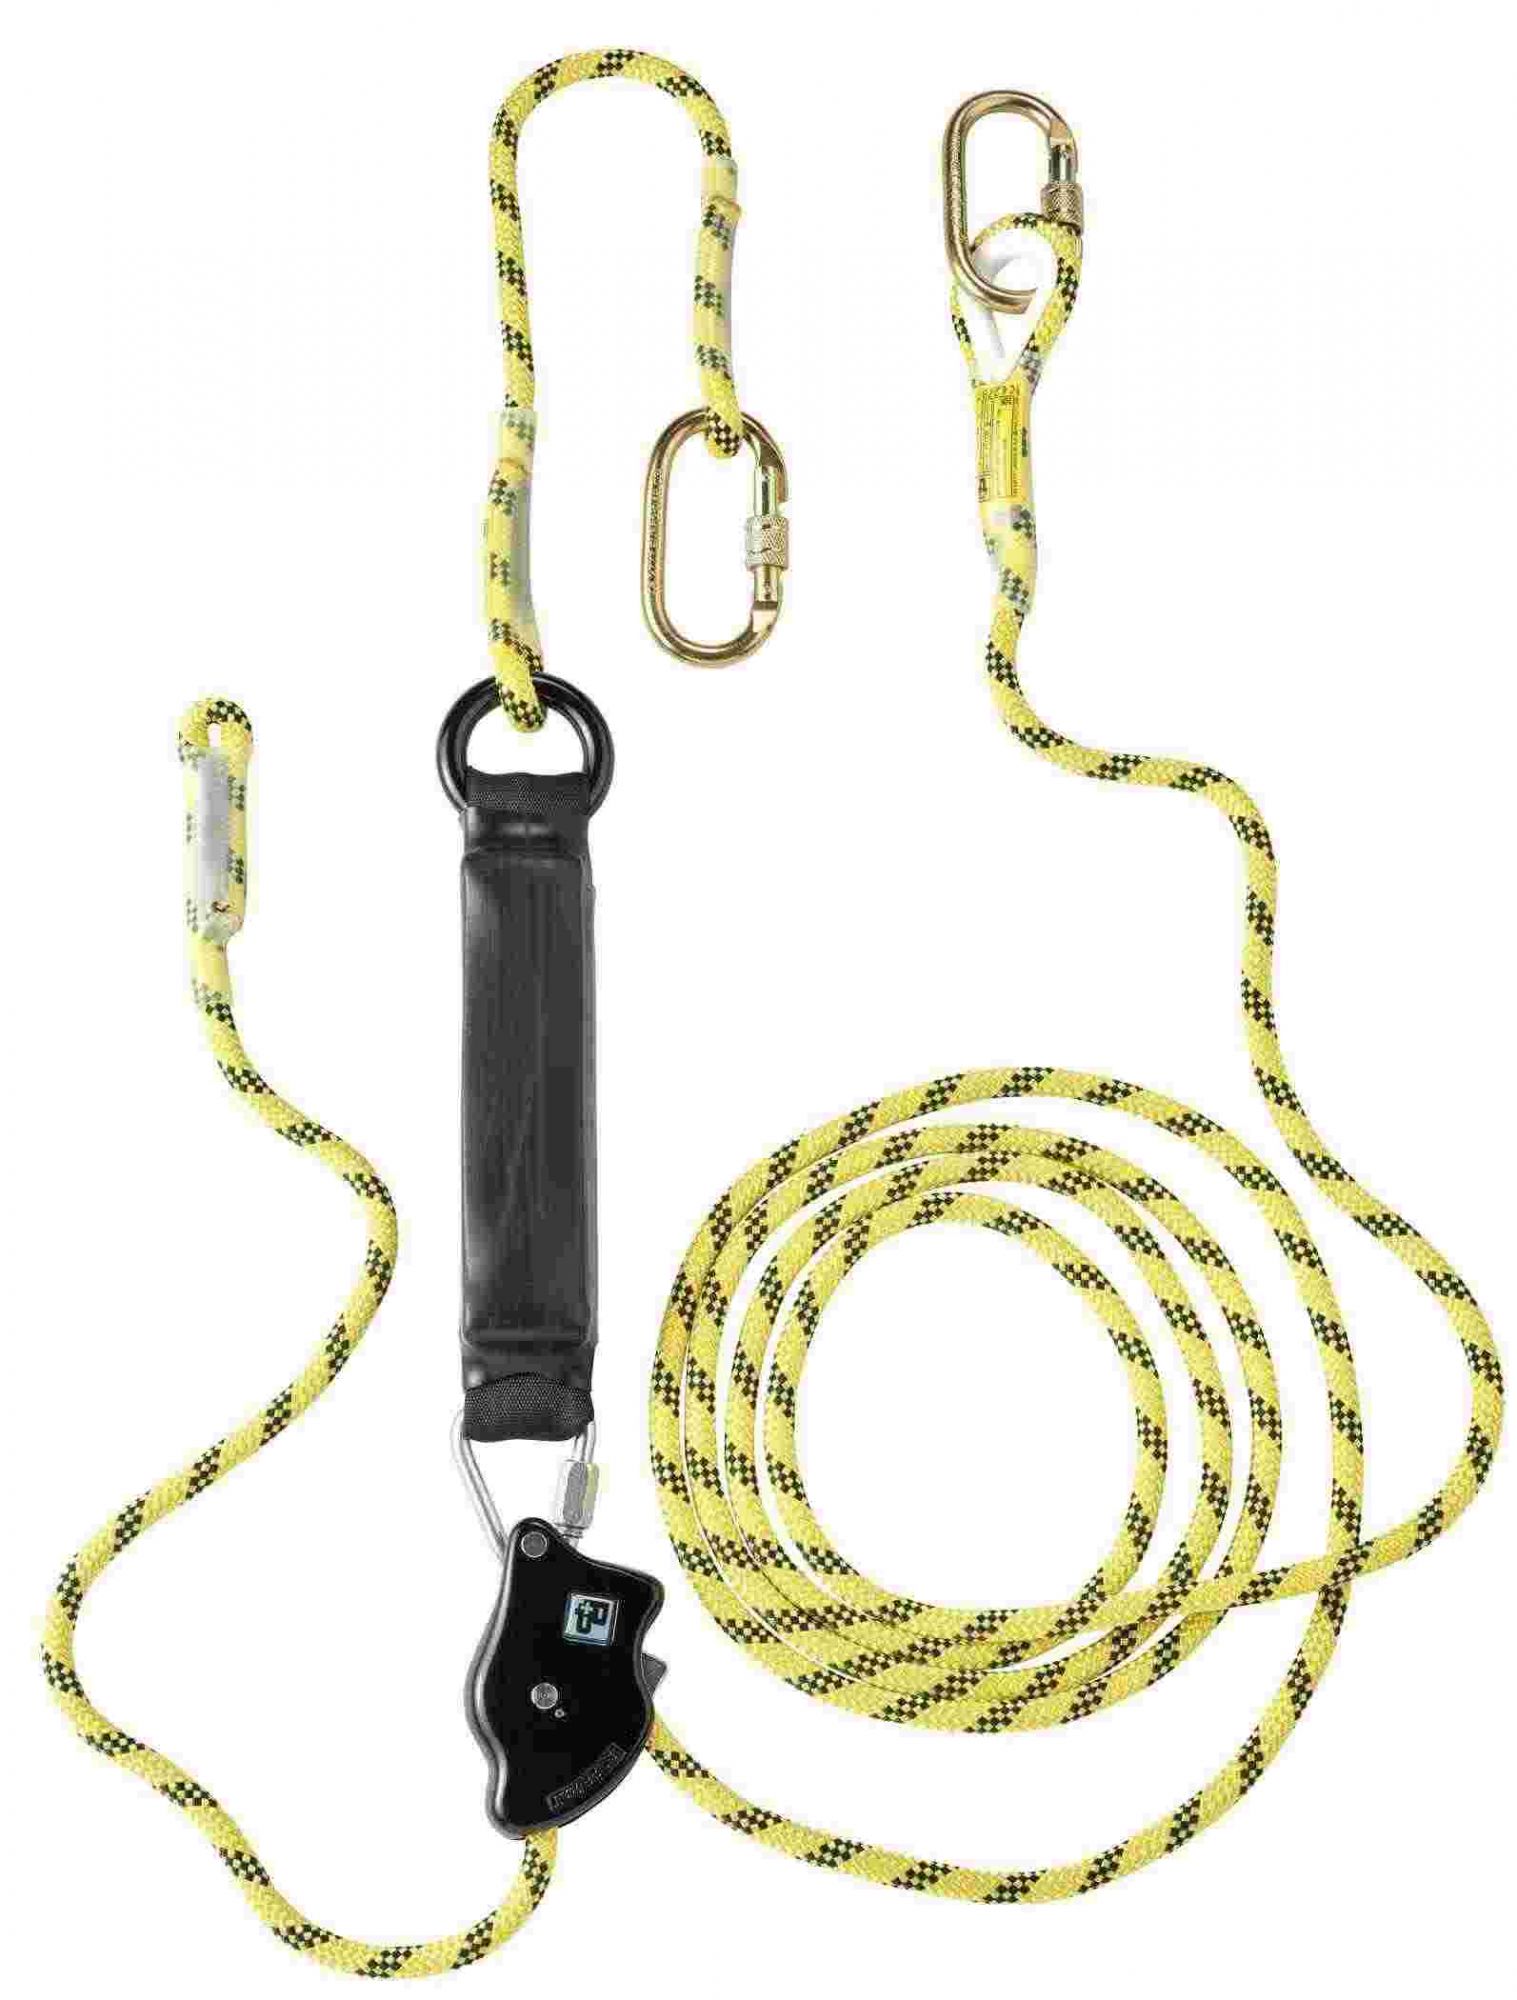 Fall Prevention Attachments :: P&P Safety Limited :: The Best Quality Fall  Protection & Prevention Products. Proud British Manufacturer Since 1980.